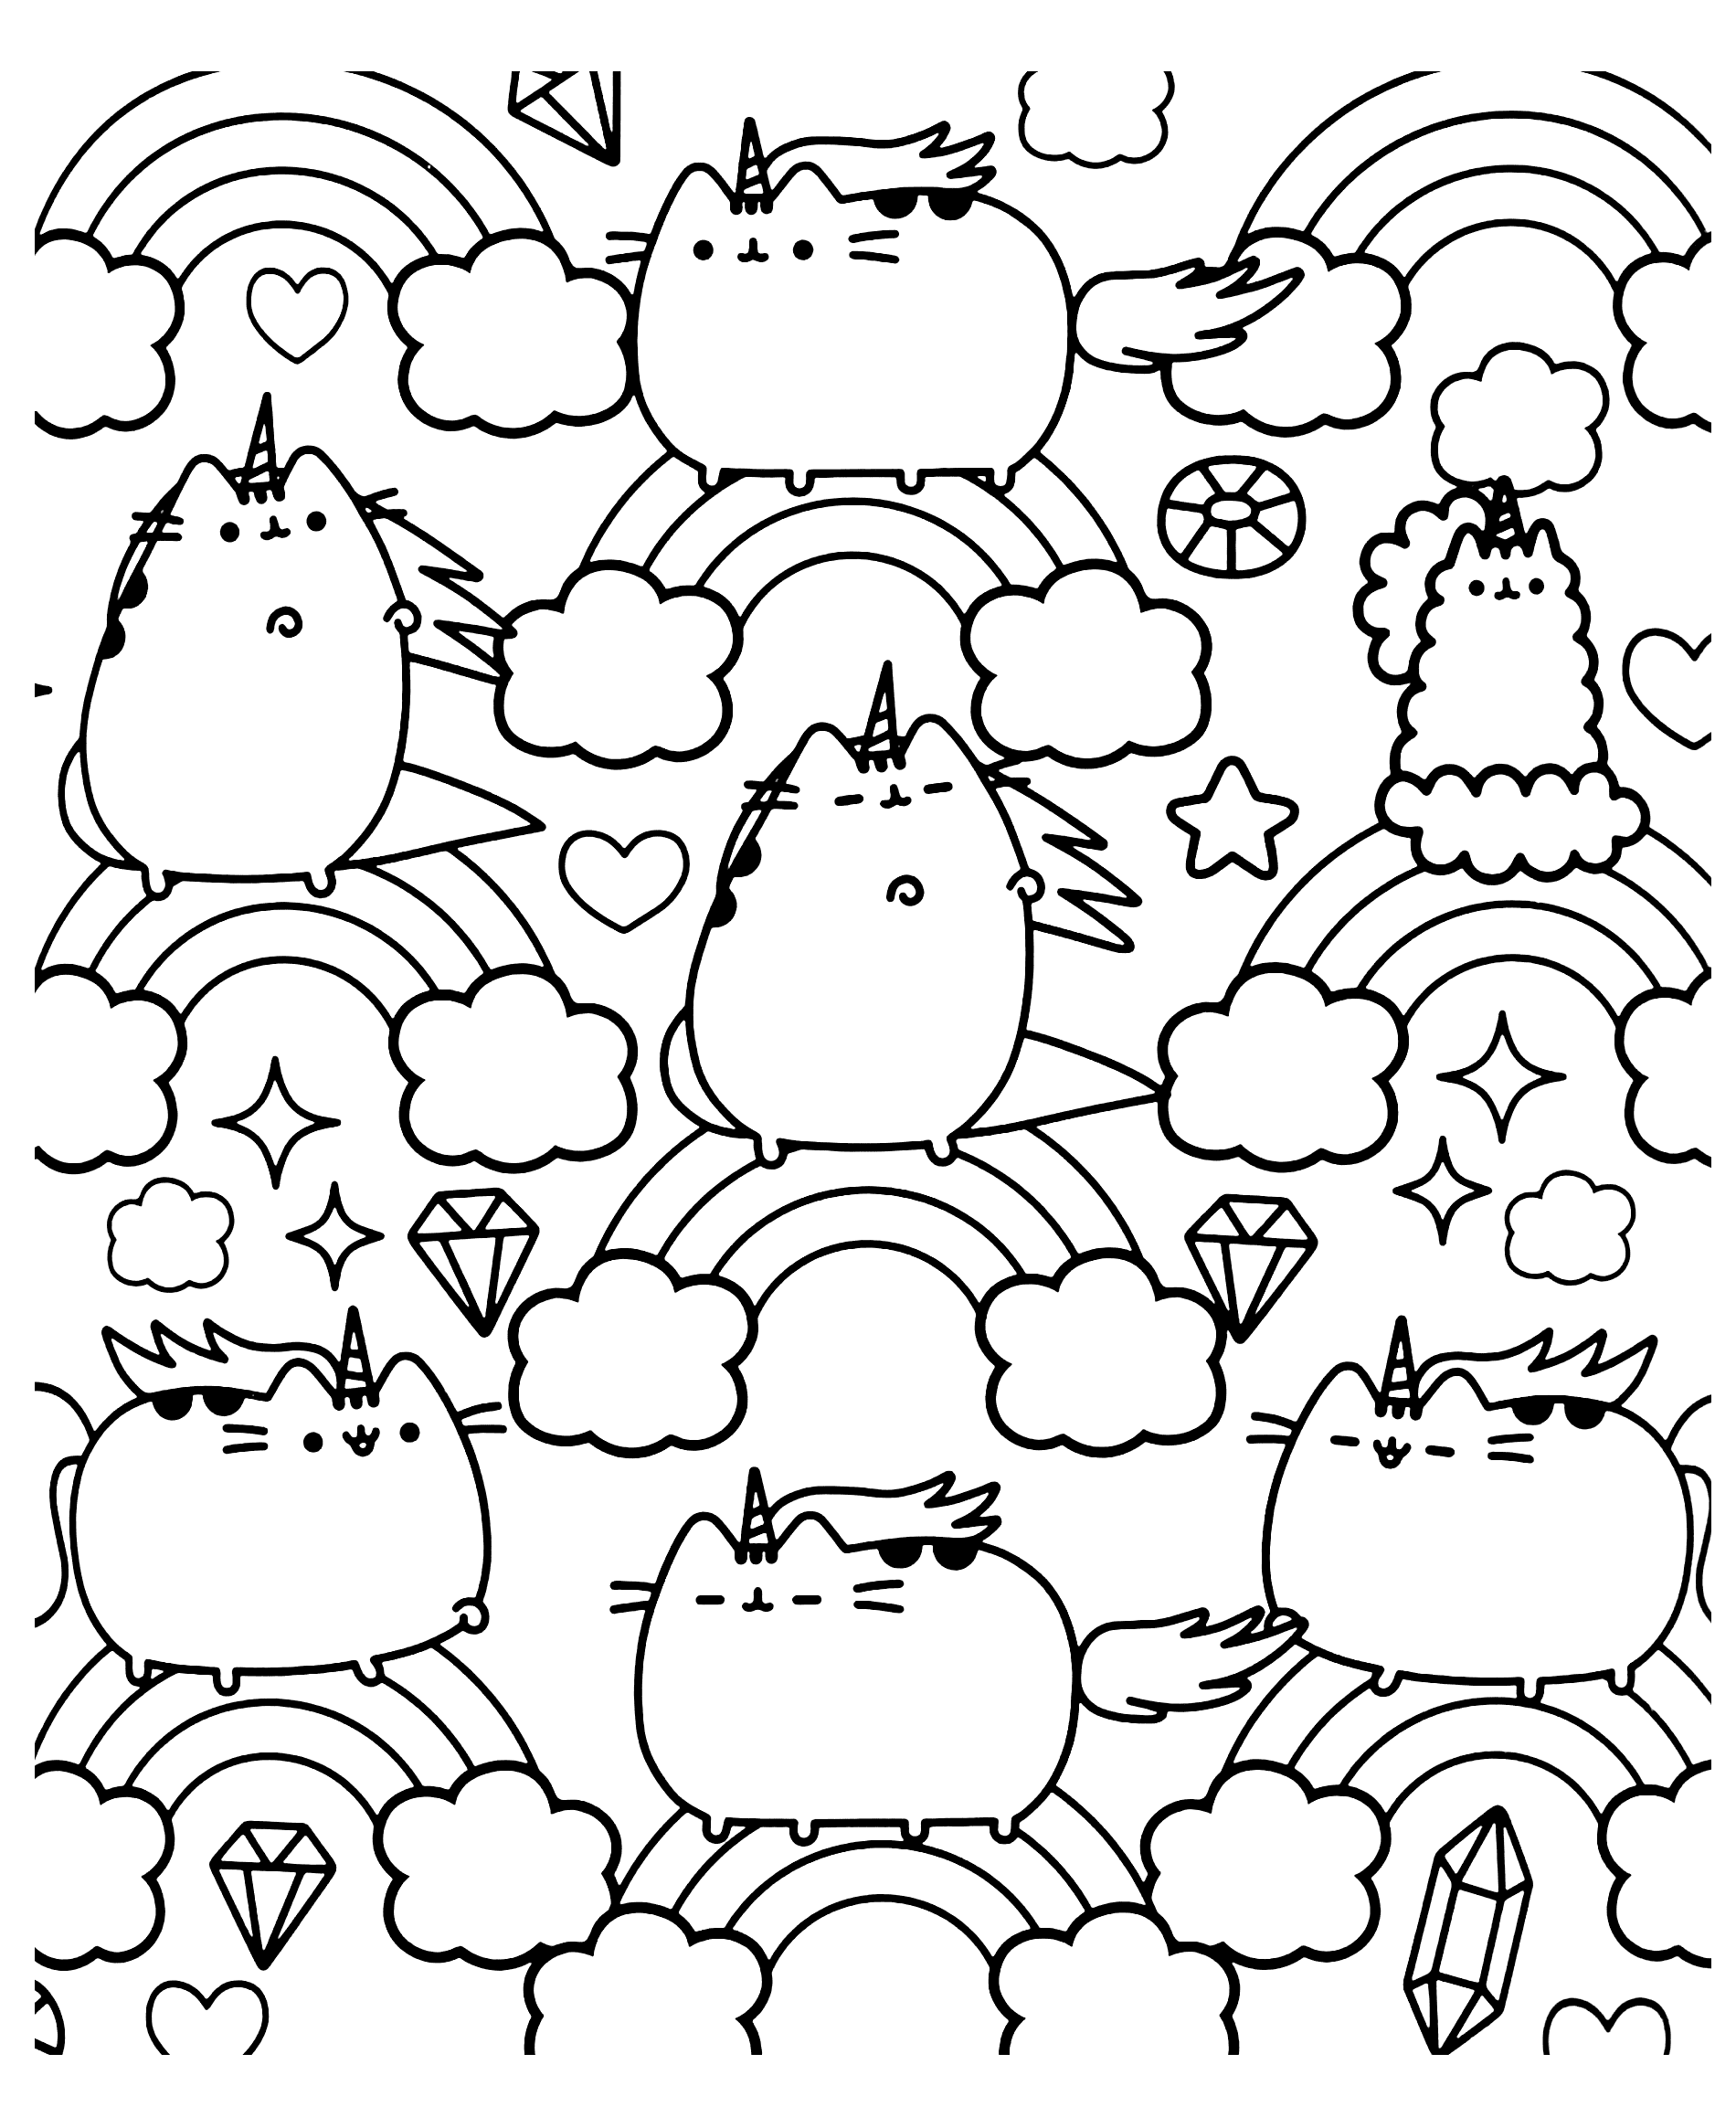 Pusheen to color for kids – Pusheen Kids Coloring Pages